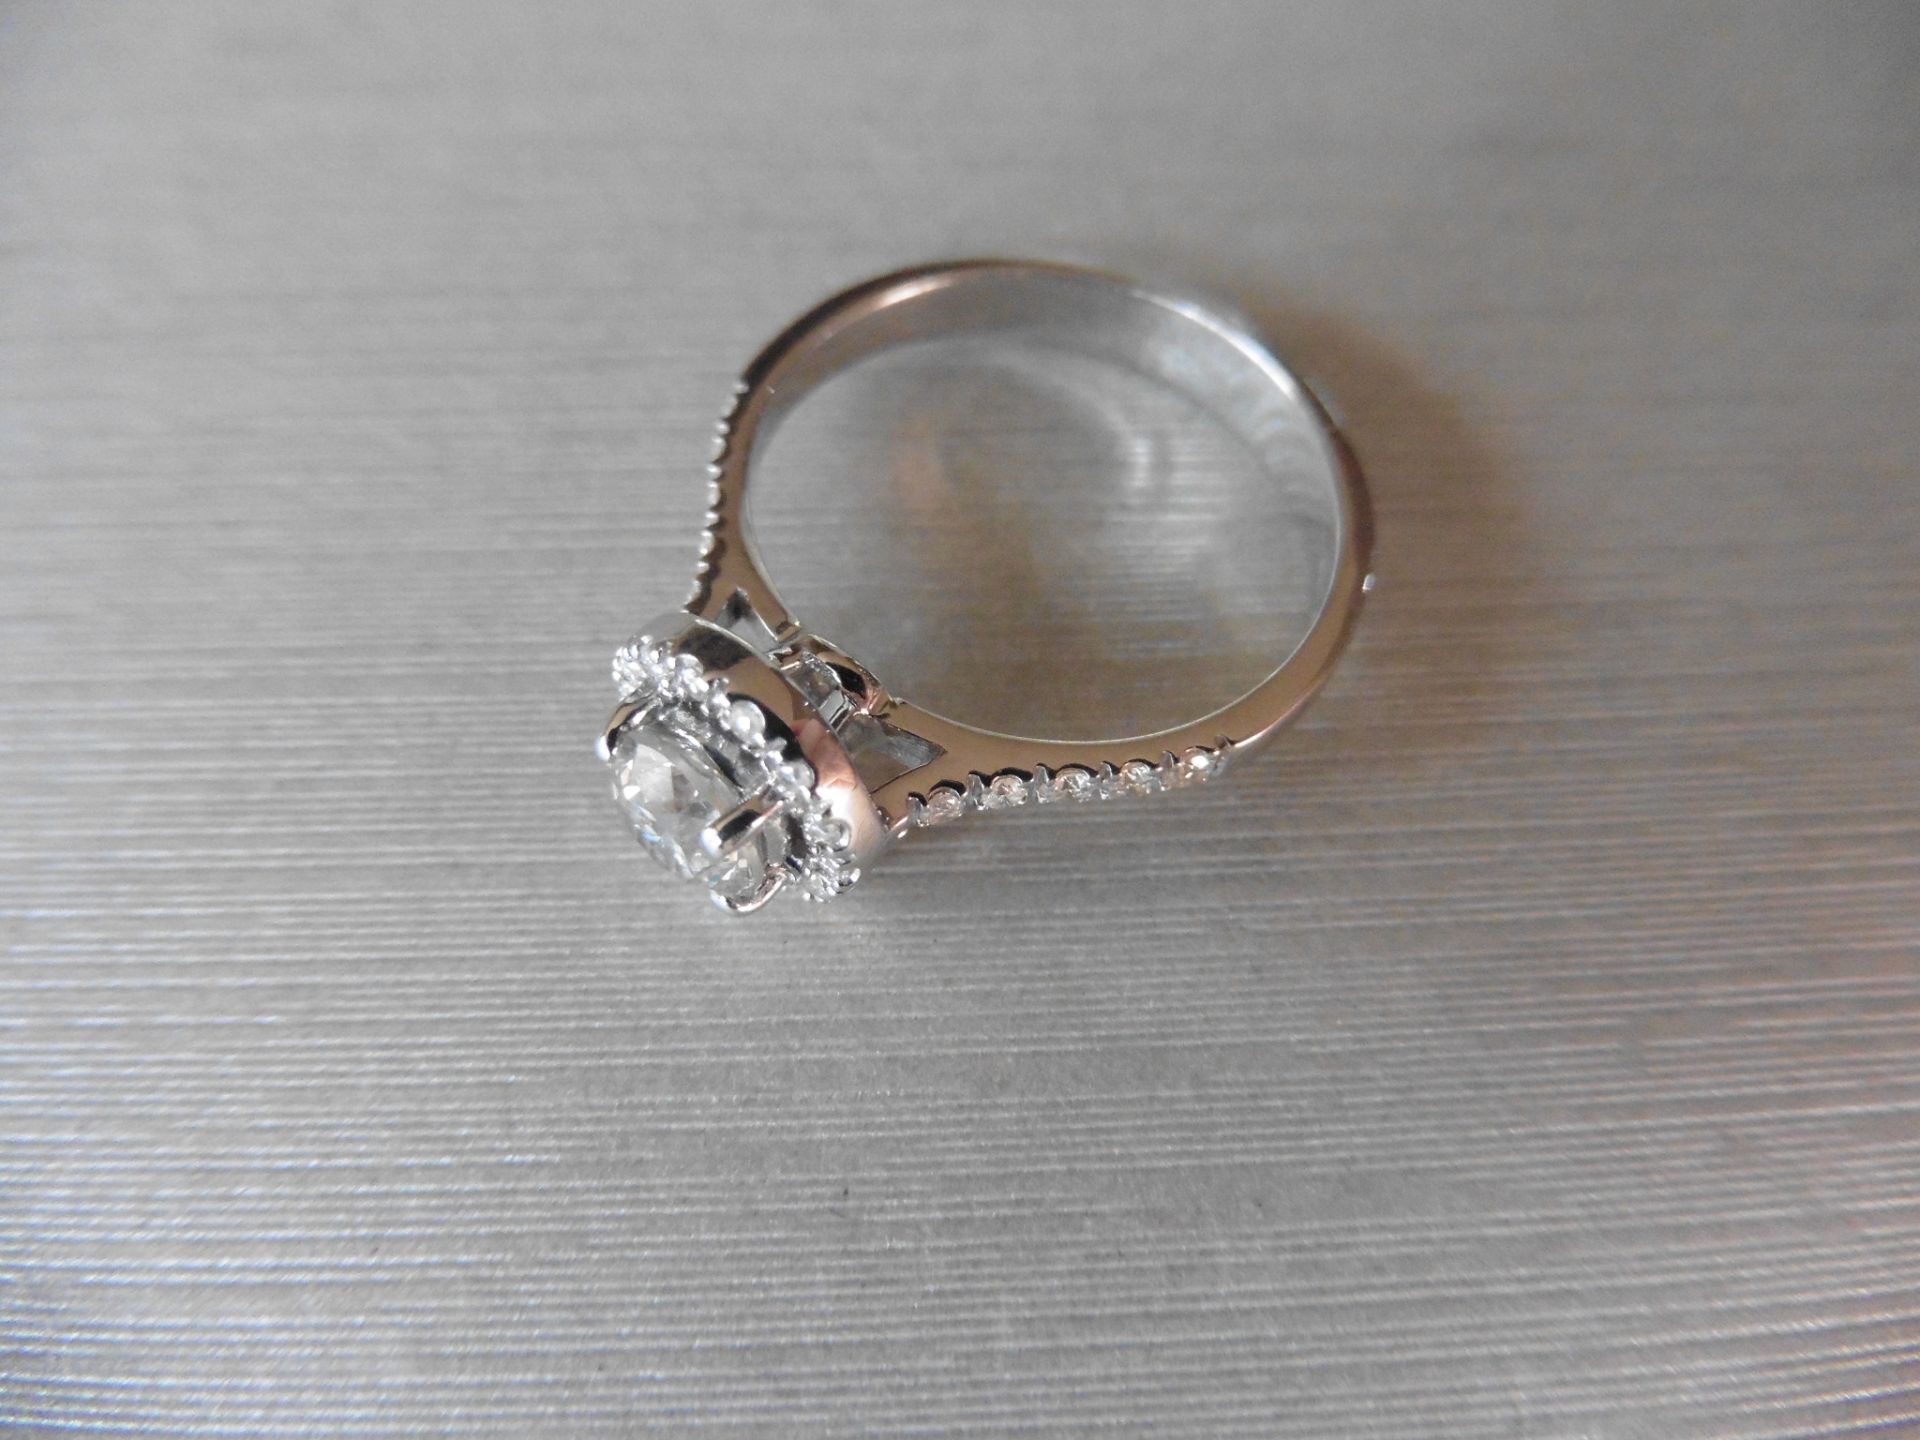 0.75ct diamond set solitaire ring. Set with a 0.50ct brilliant cut diamond in the centre, I - Image 4 of 5